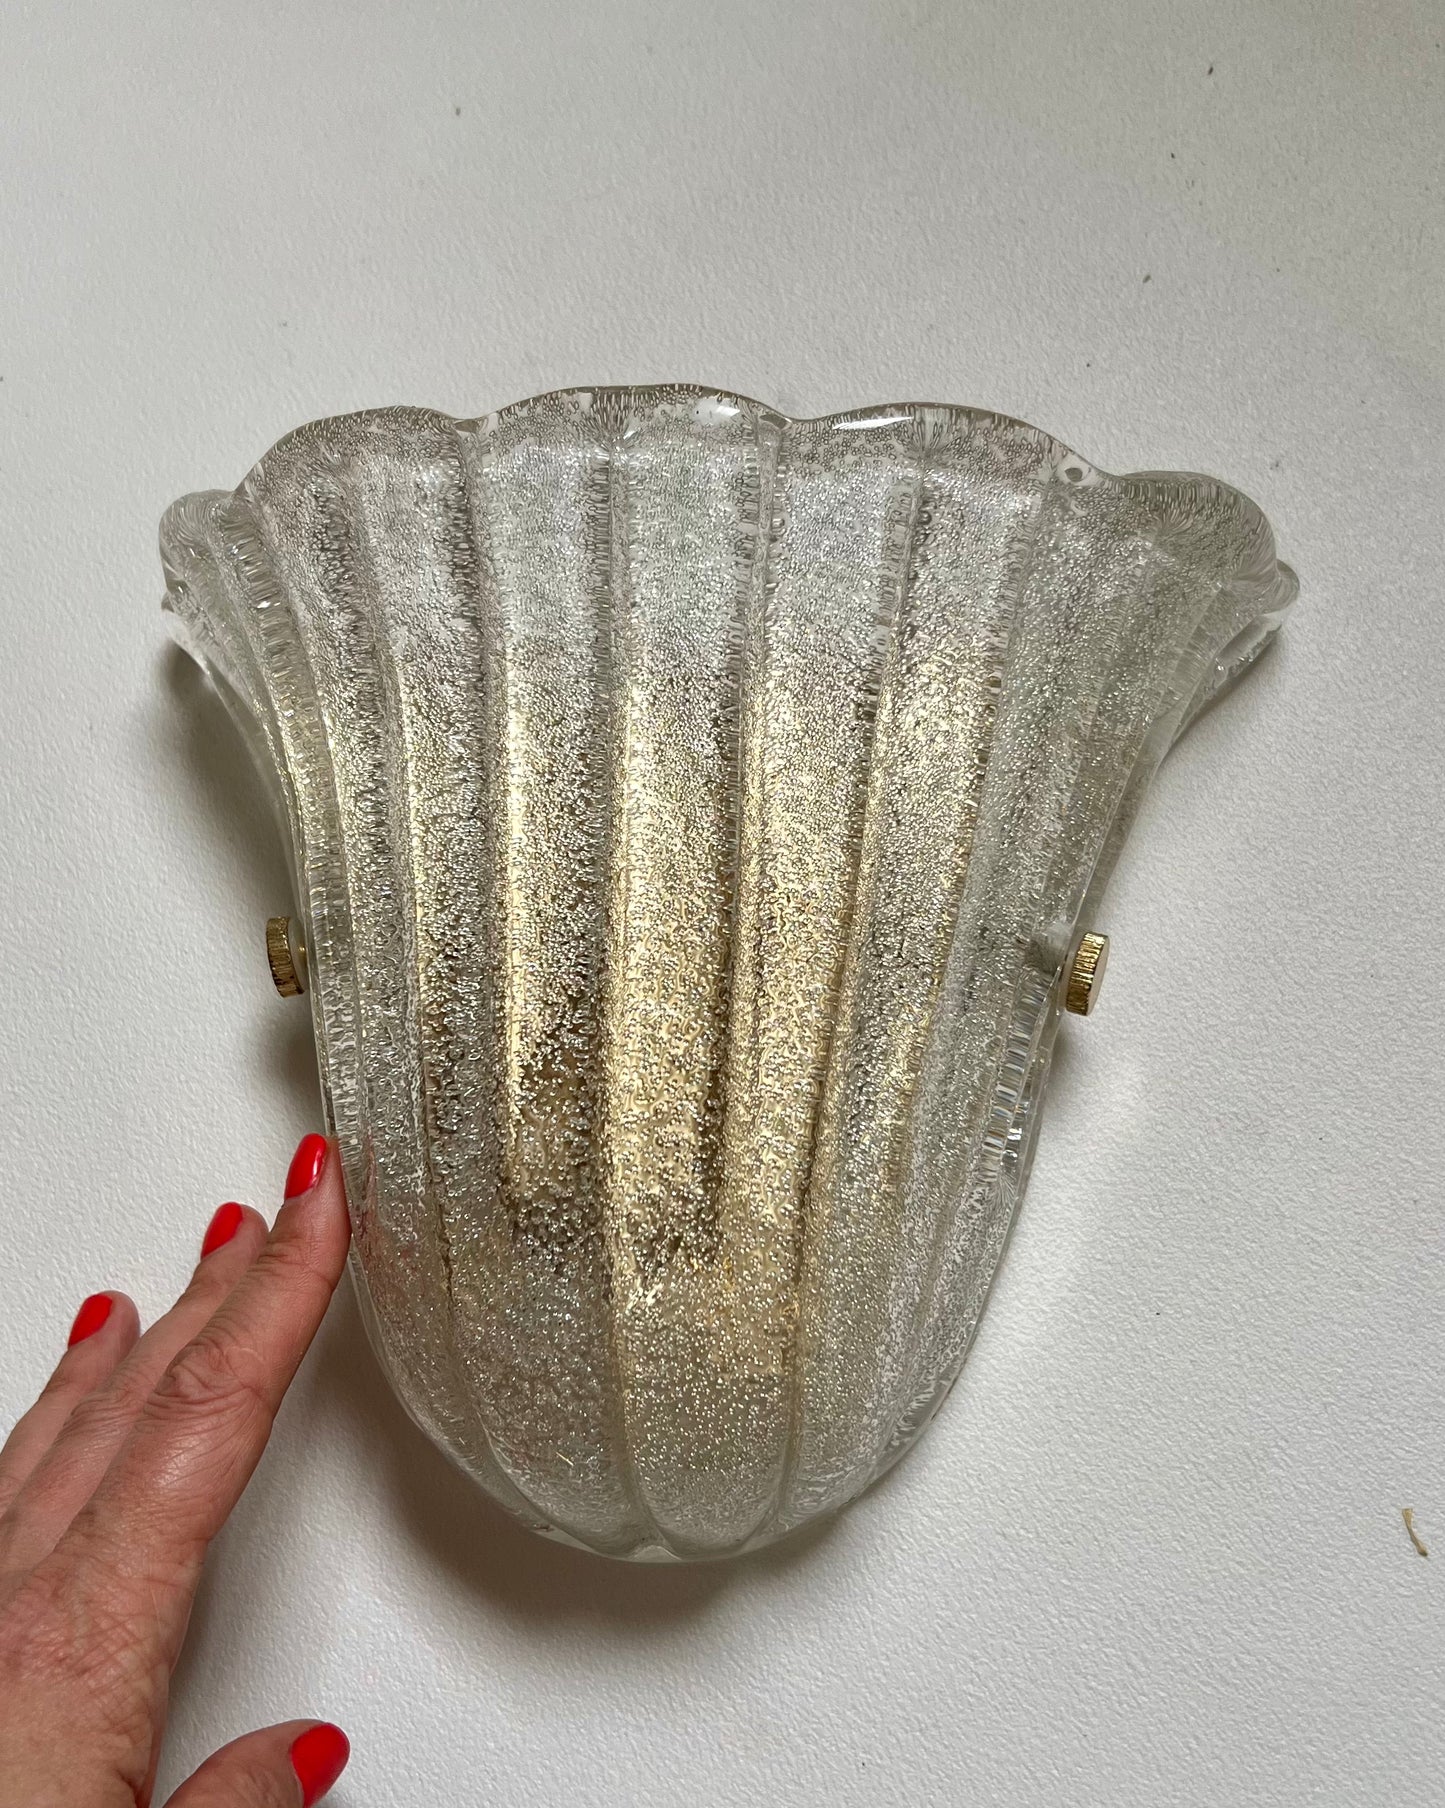 - Vintage Murano Scalloped Shell Sconce, Italy